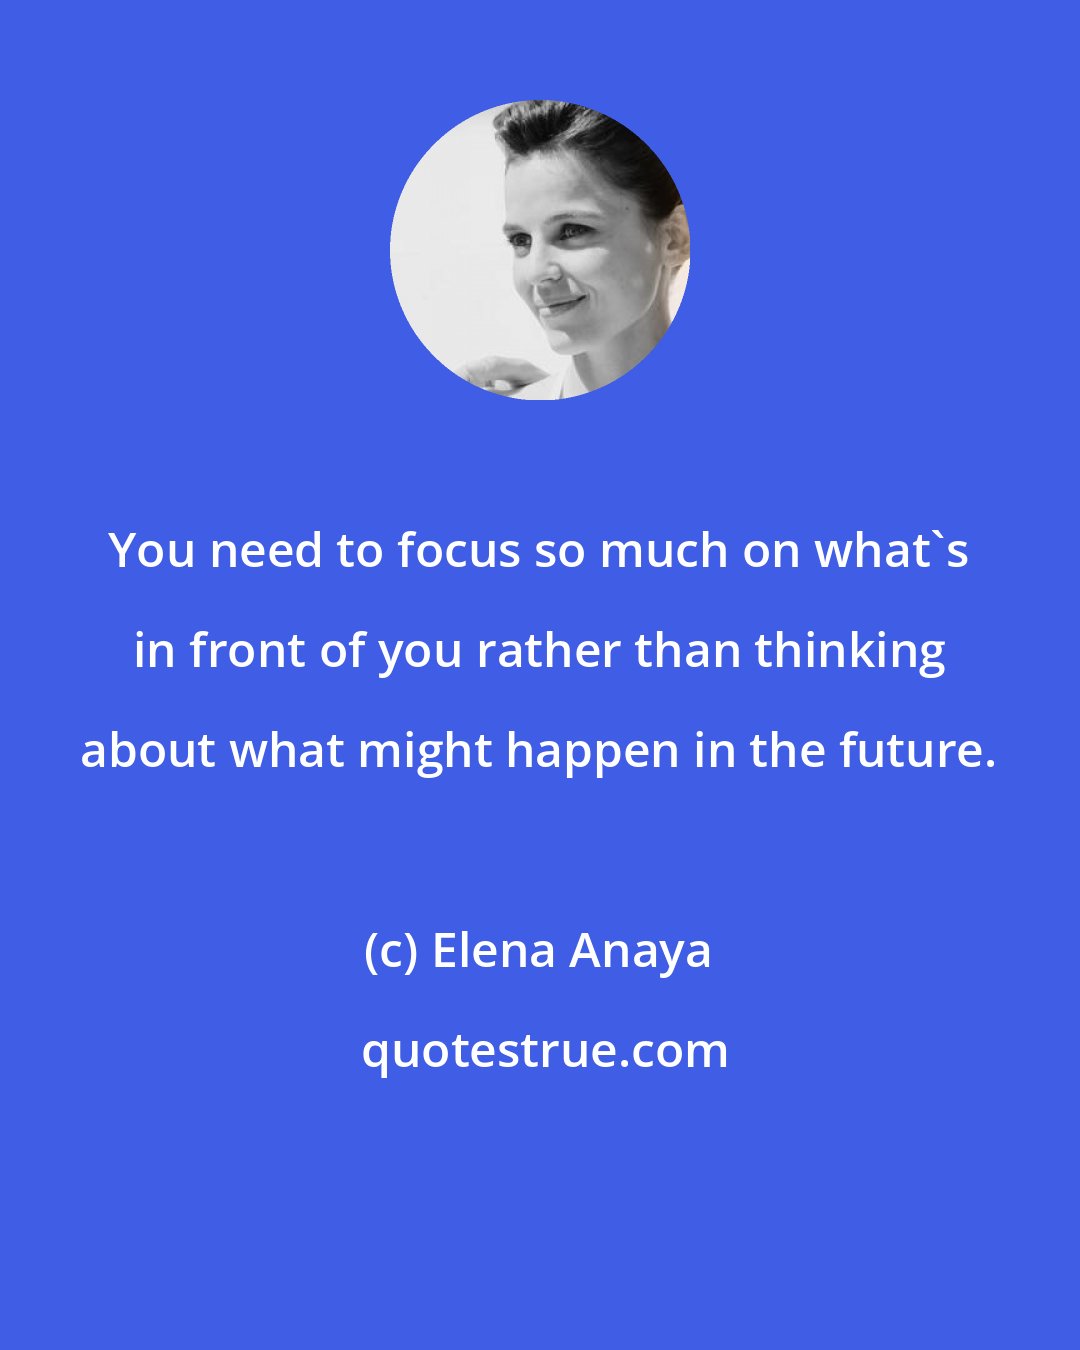 Elena Anaya: You need to focus so much on what's in front of you rather than thinking about what might happen in the future.